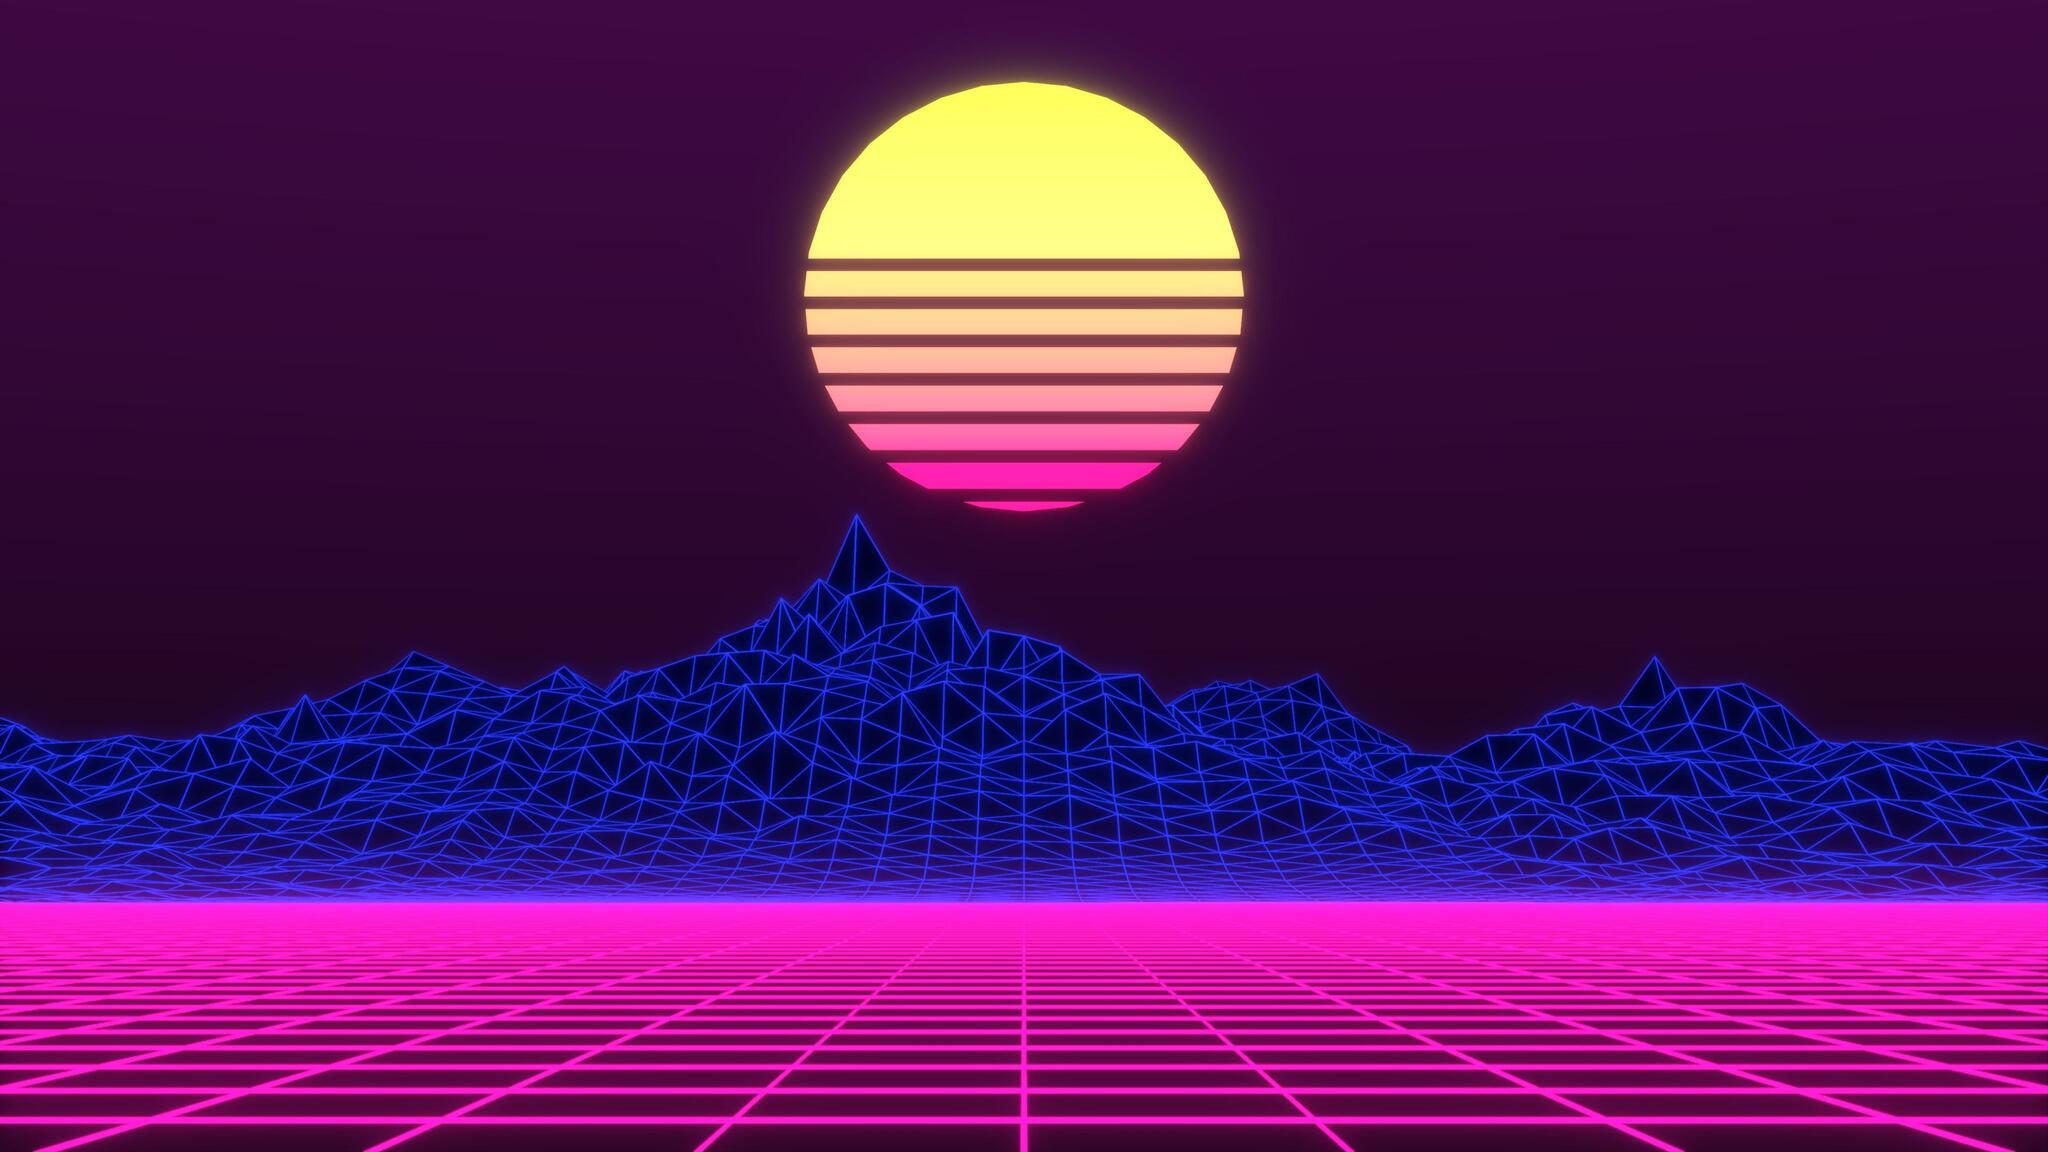 48x1152 Neon Retrowave Minimalism 4k 48x1152 Resolution Hd 4k Wallpapers Images Backgrounds Photos And Pictures